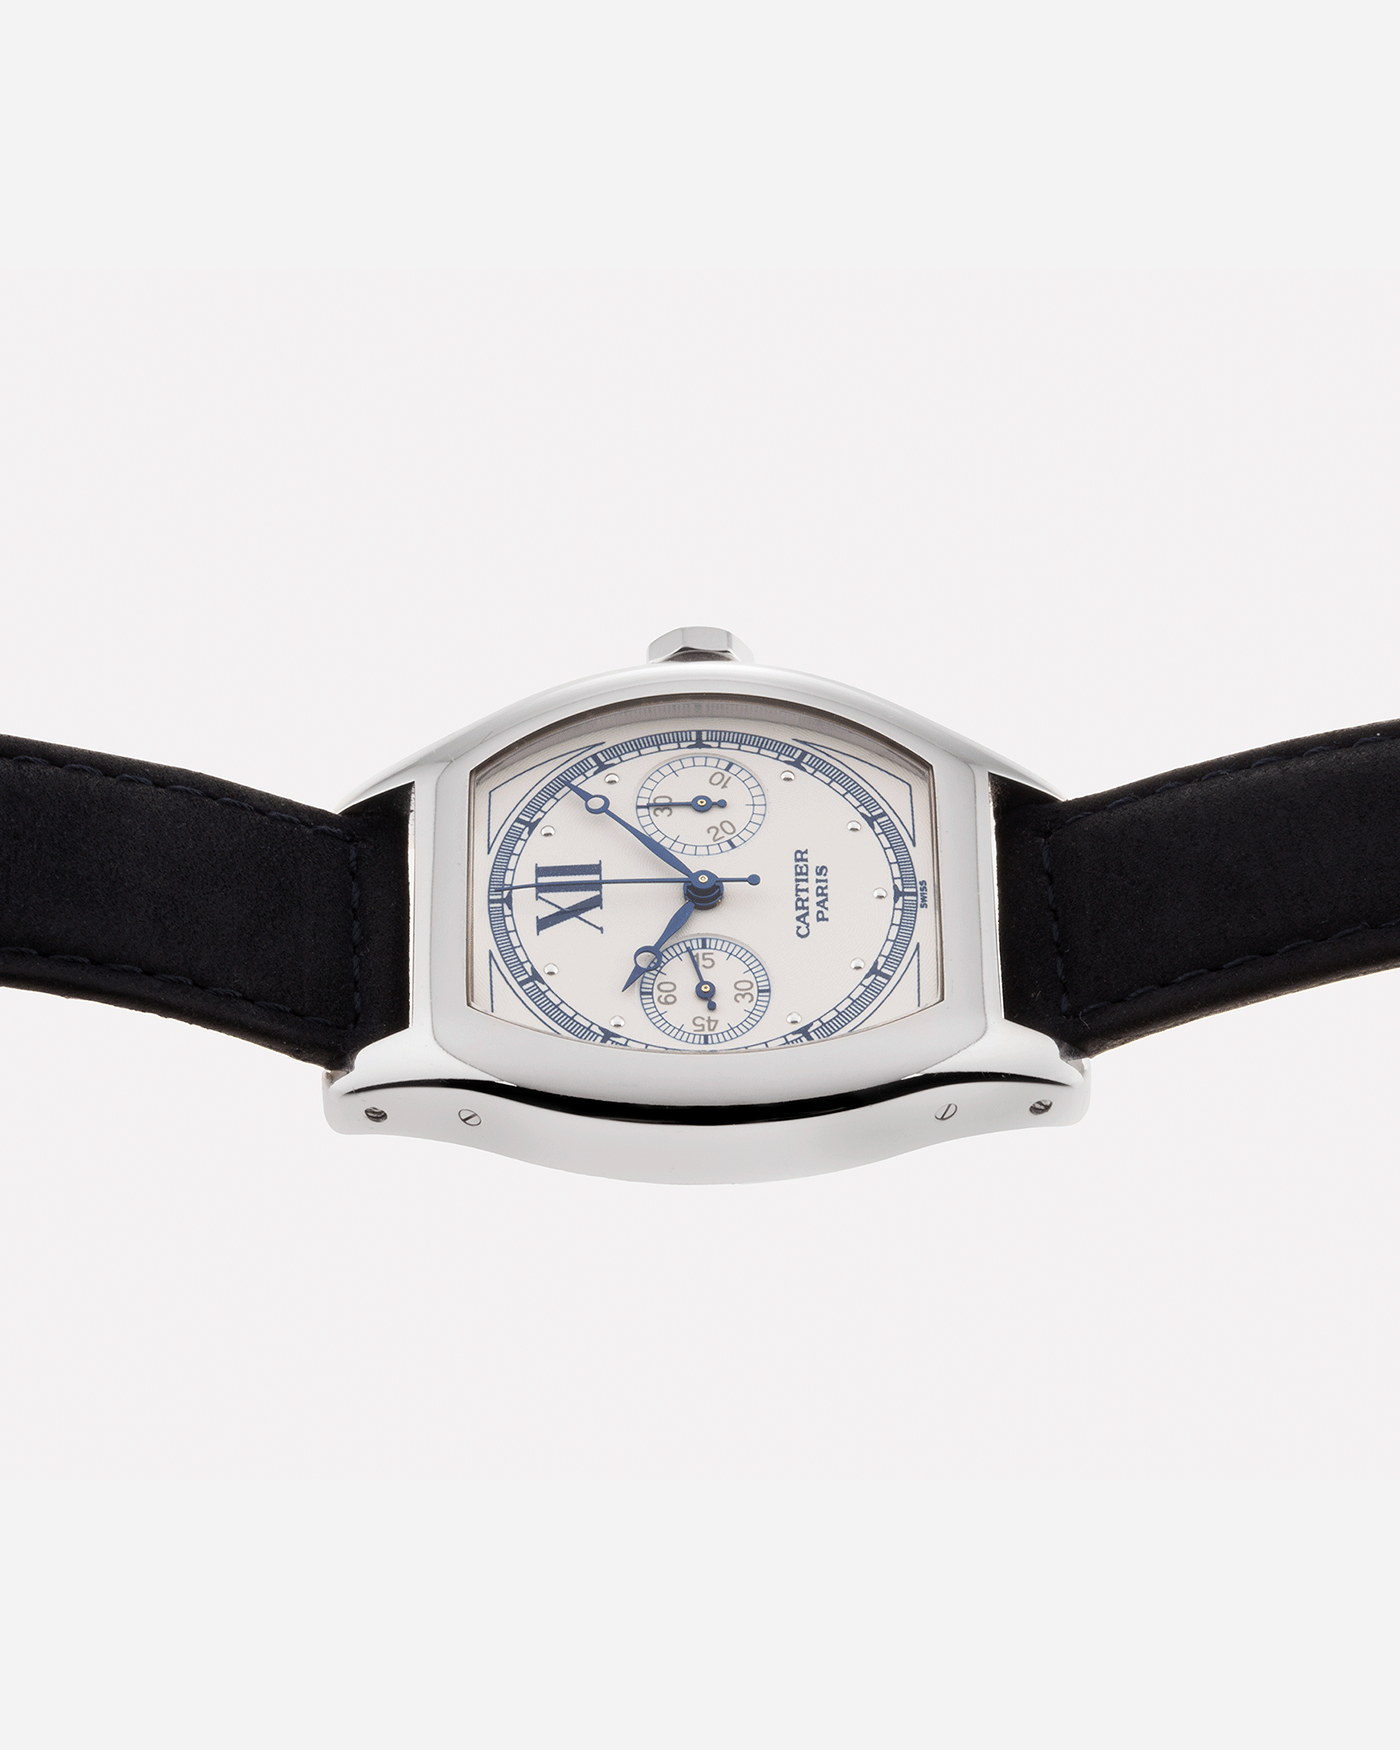 Brand: Cartier Year: 2000’s Model: CPCP Collection Prive Tortue Monopoussoir Reference: 2356 Material: 18k White Gold Movement: THA Cal. 045MC Case Diameter: 43 x 35 mm Strap: Navy Blue Suede Calf Strap with separate 18k Cartier White Gold Deployant